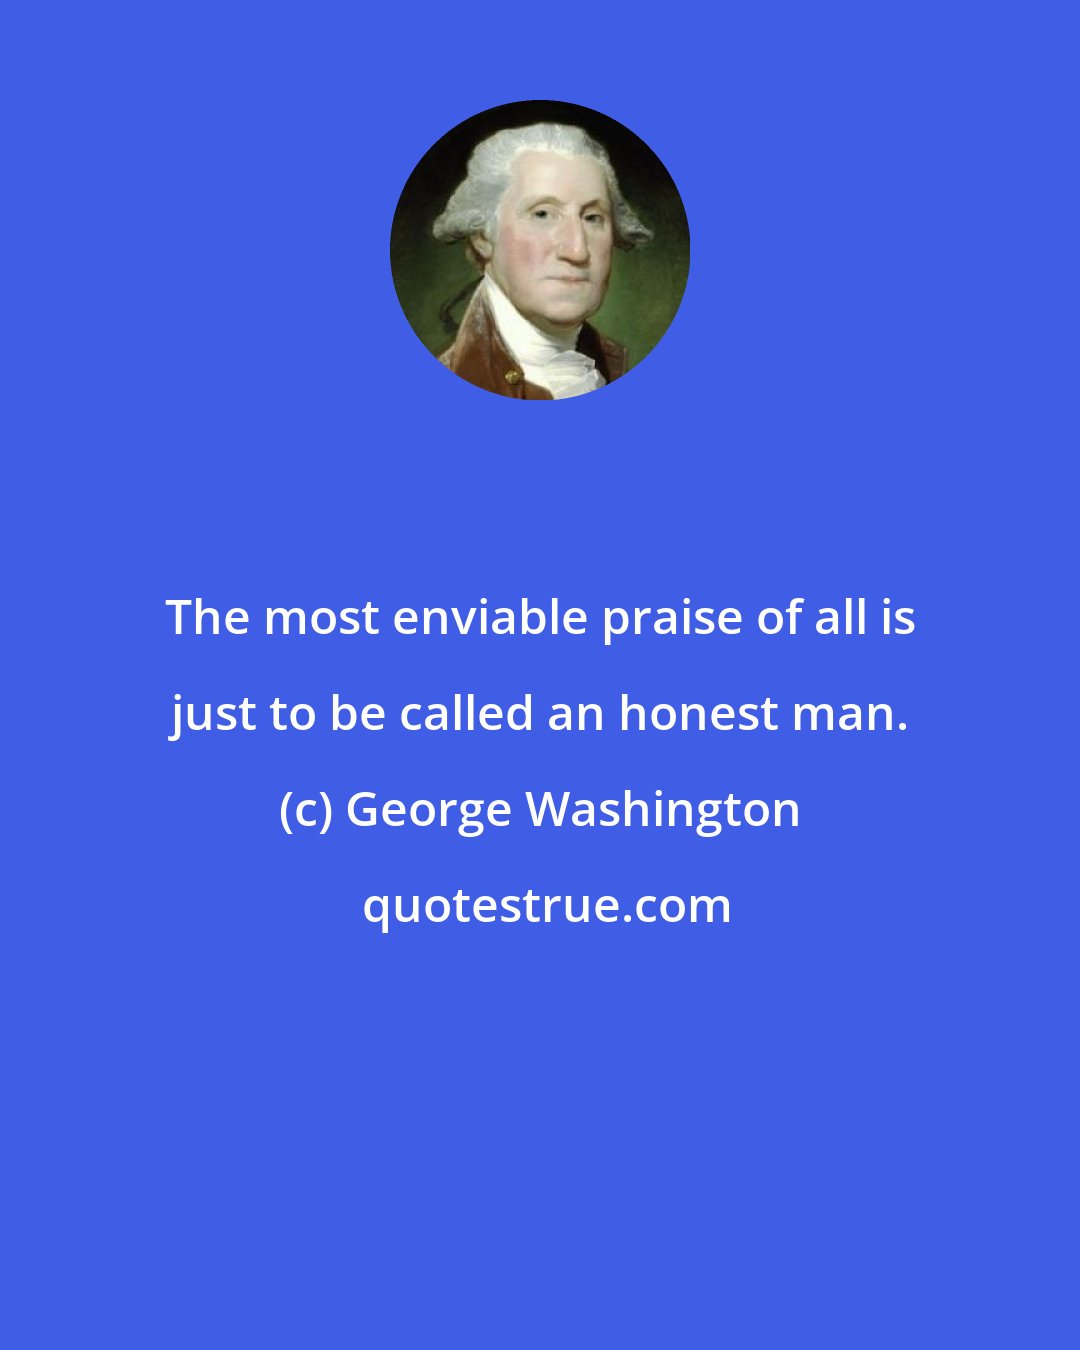 George Washington: The most enviable praise of all is just to be called an honest man.